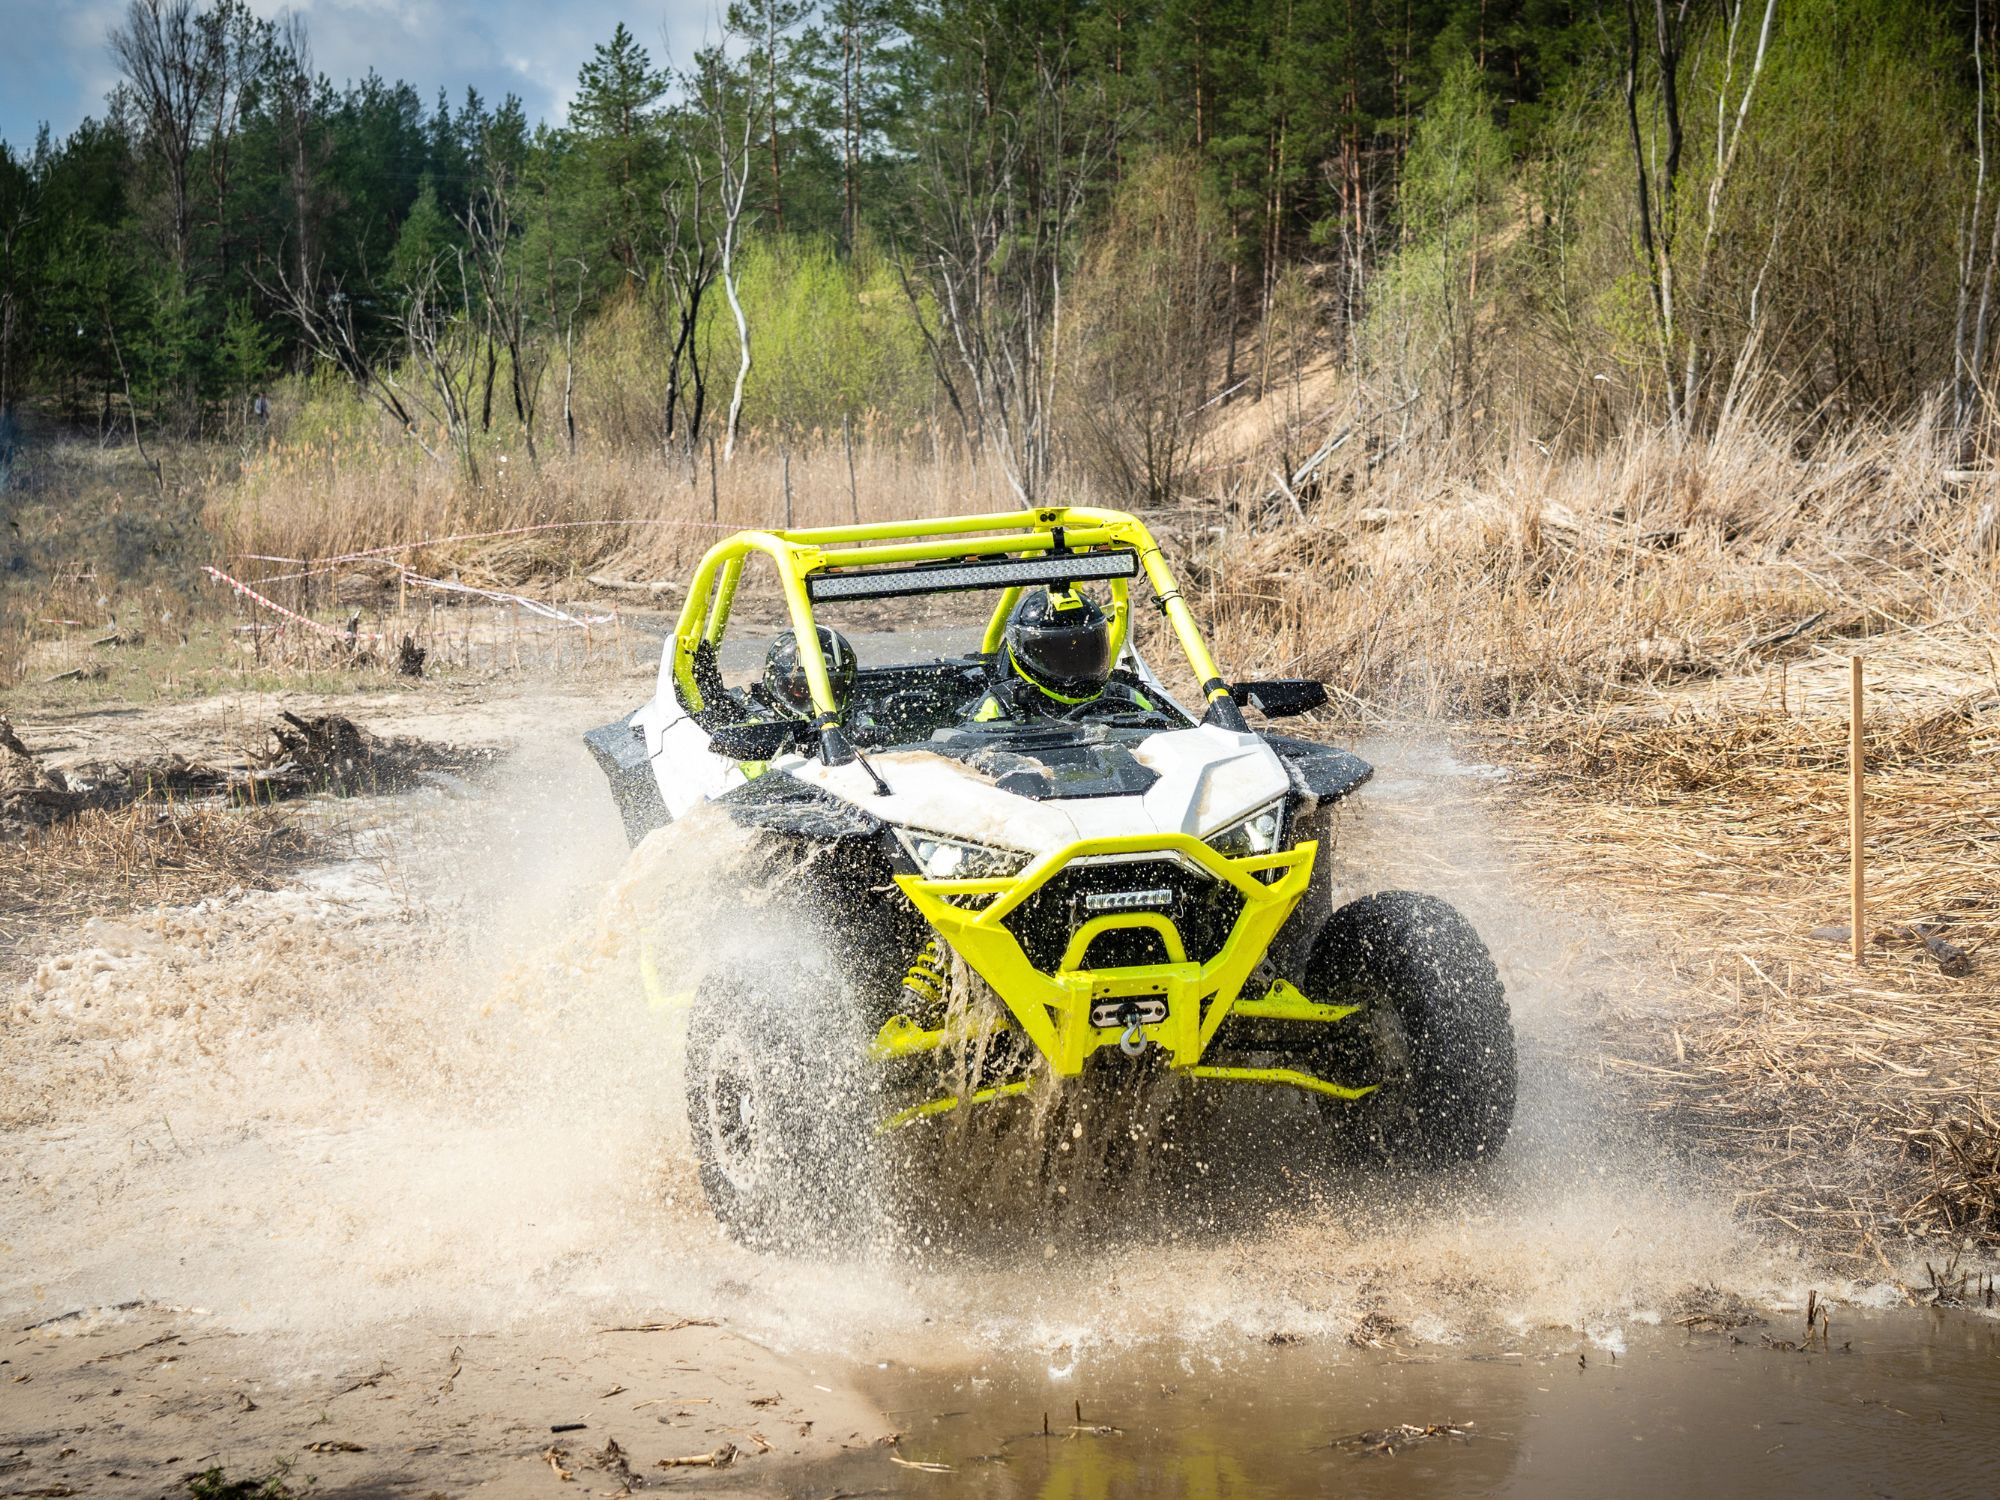 Upgrade Suggestions for Your Outdoor UTV